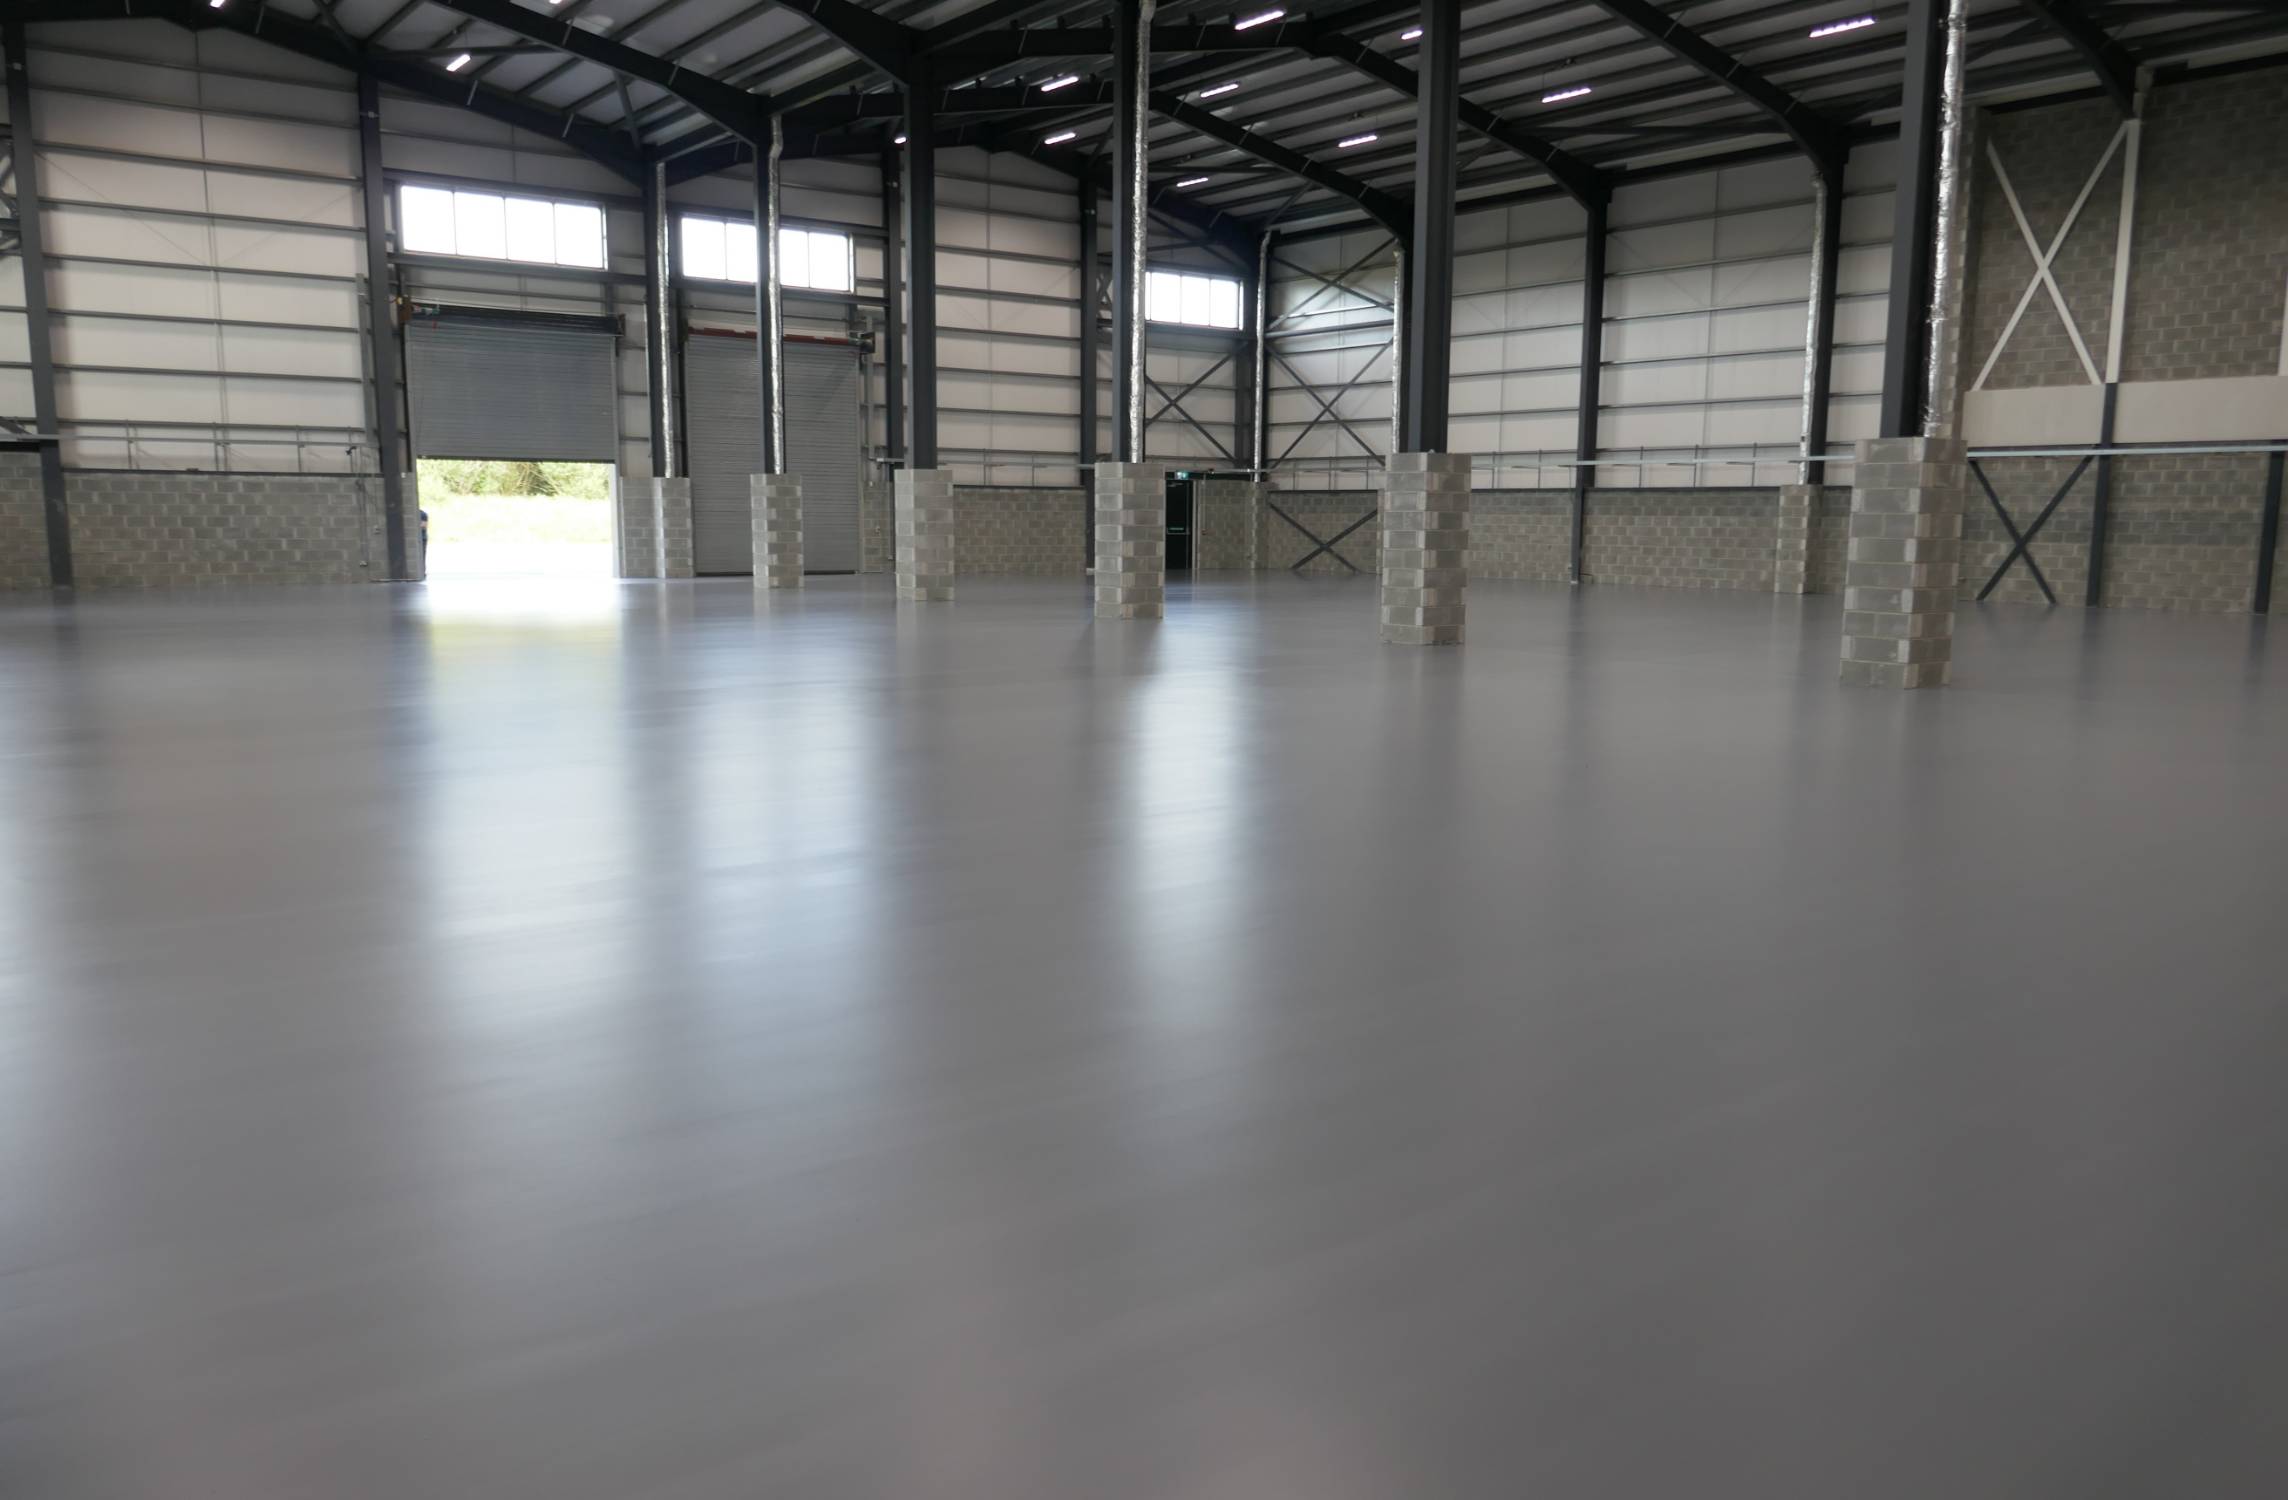 Resin flooring system HACCP certified - Trazcon® HB  